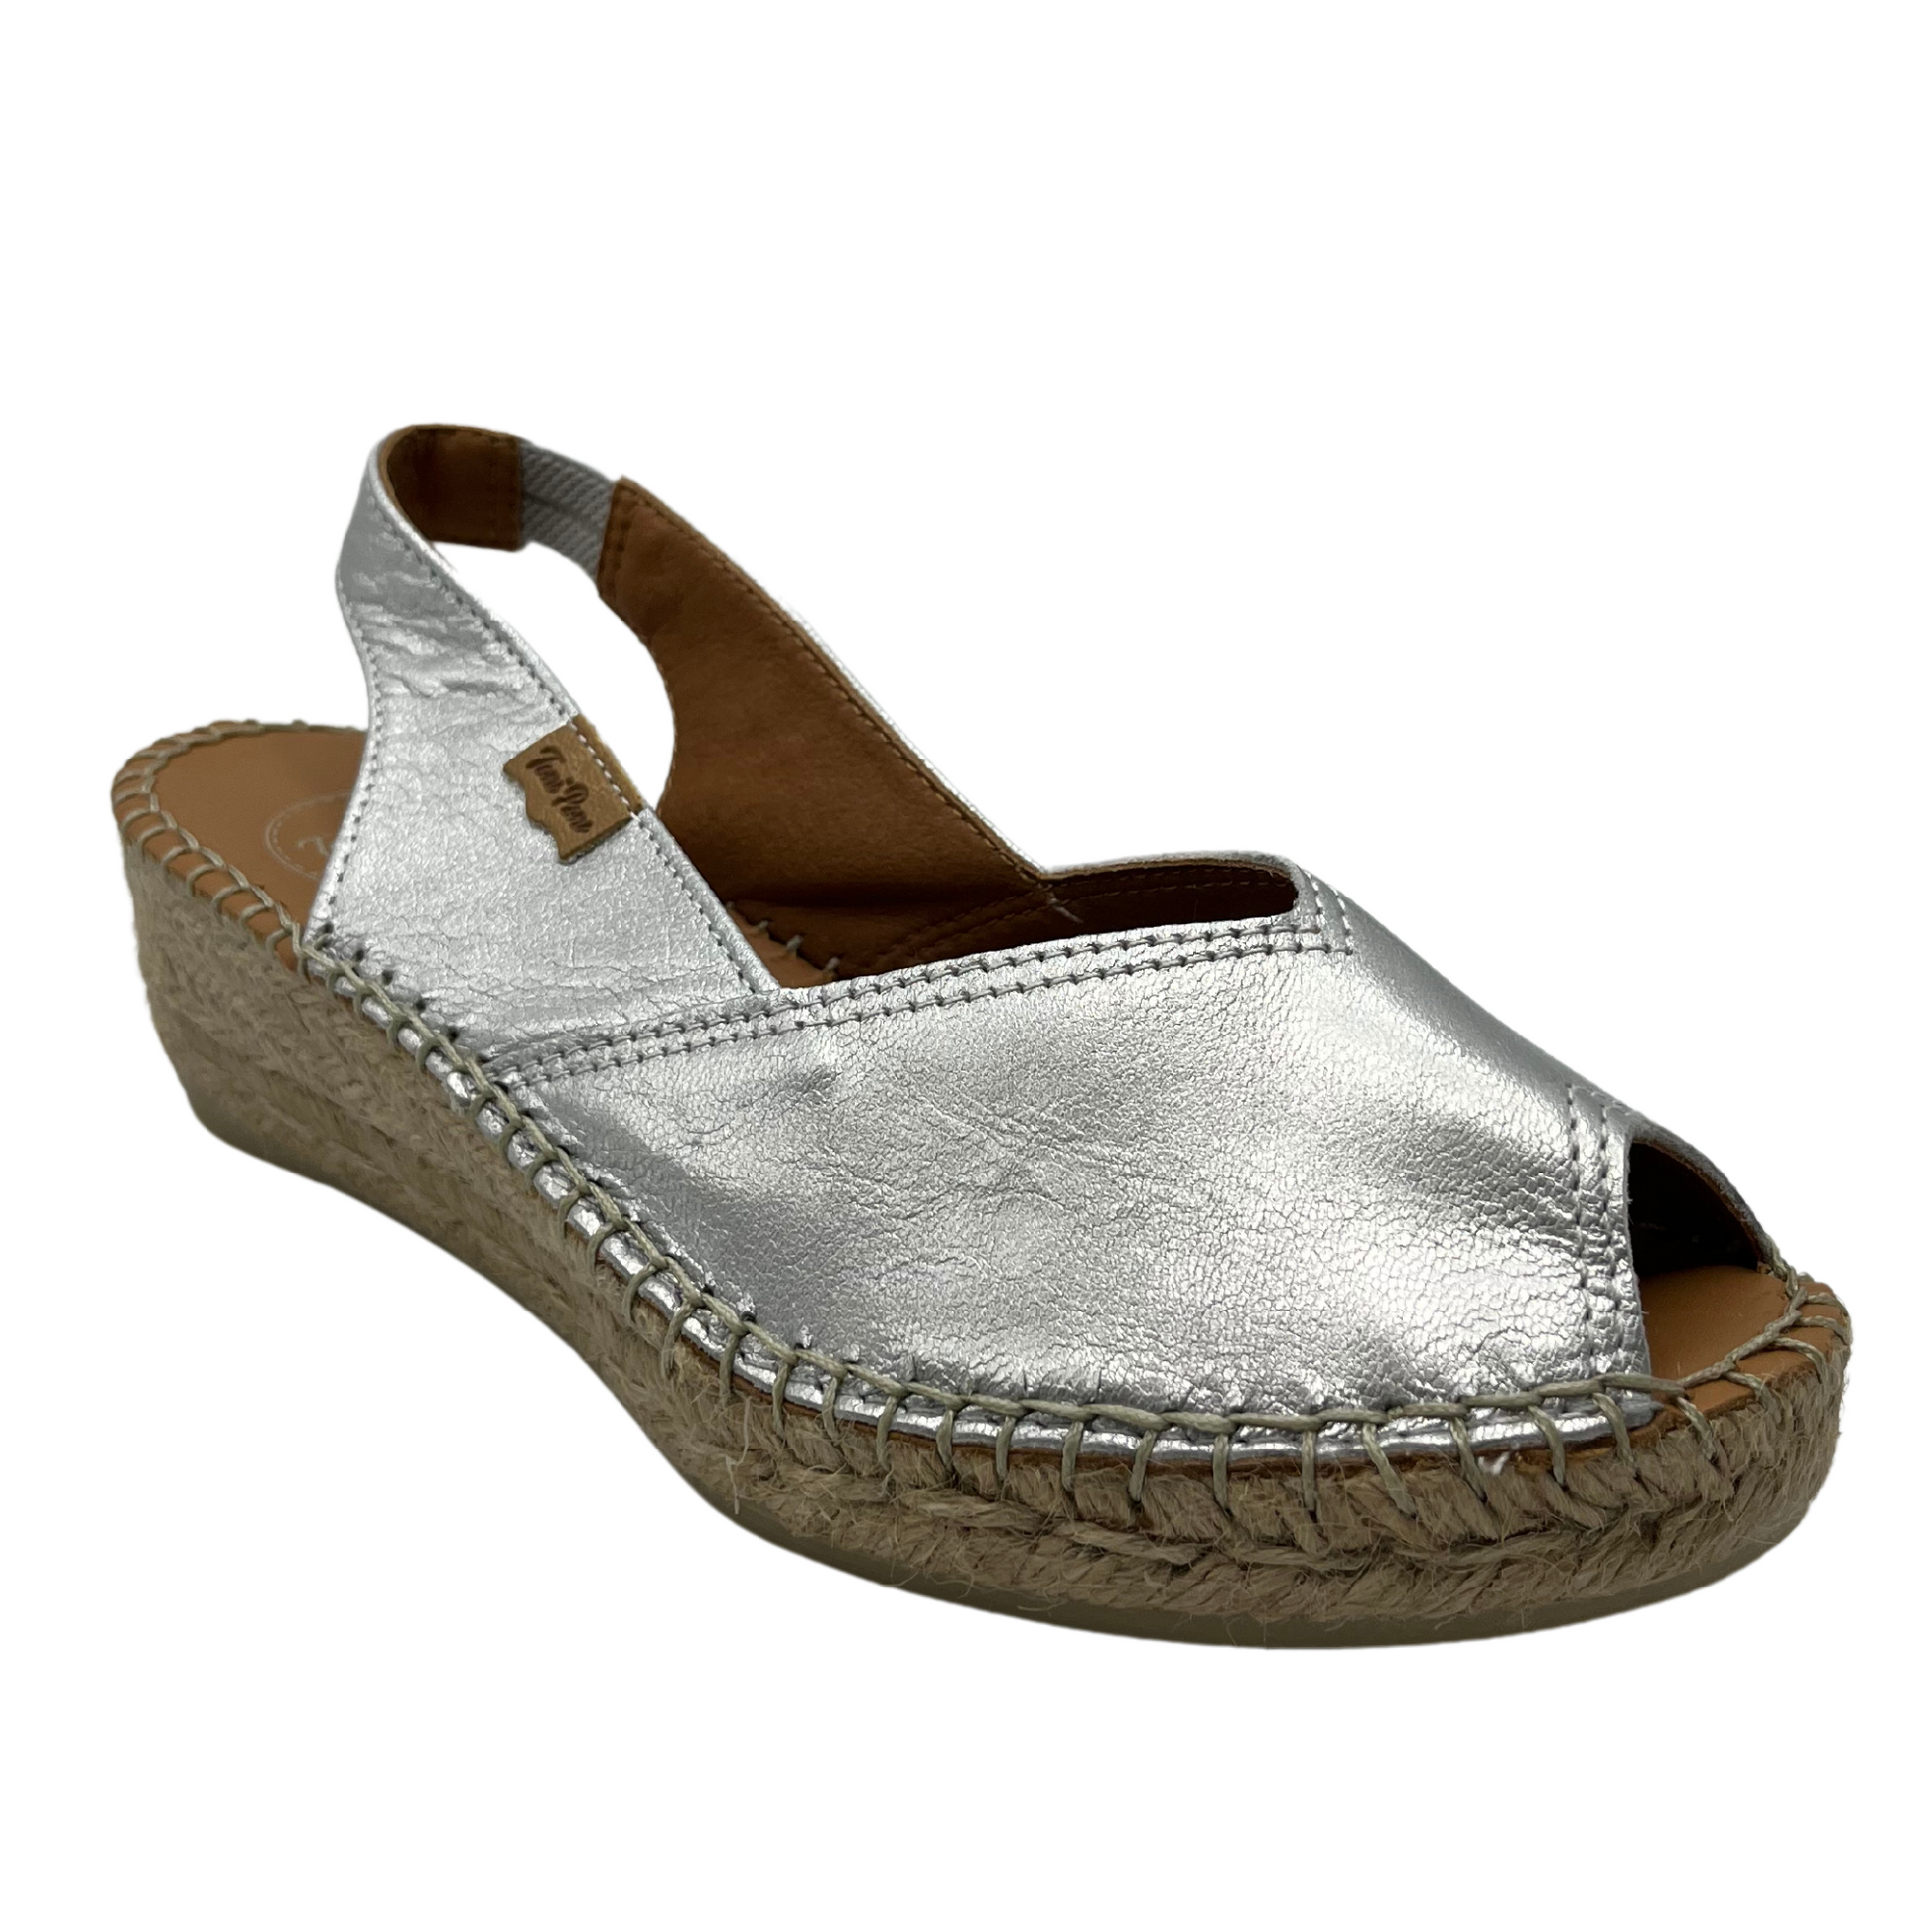 45 degree angled view of silver leather espadrille sandal with peep toe and slingback